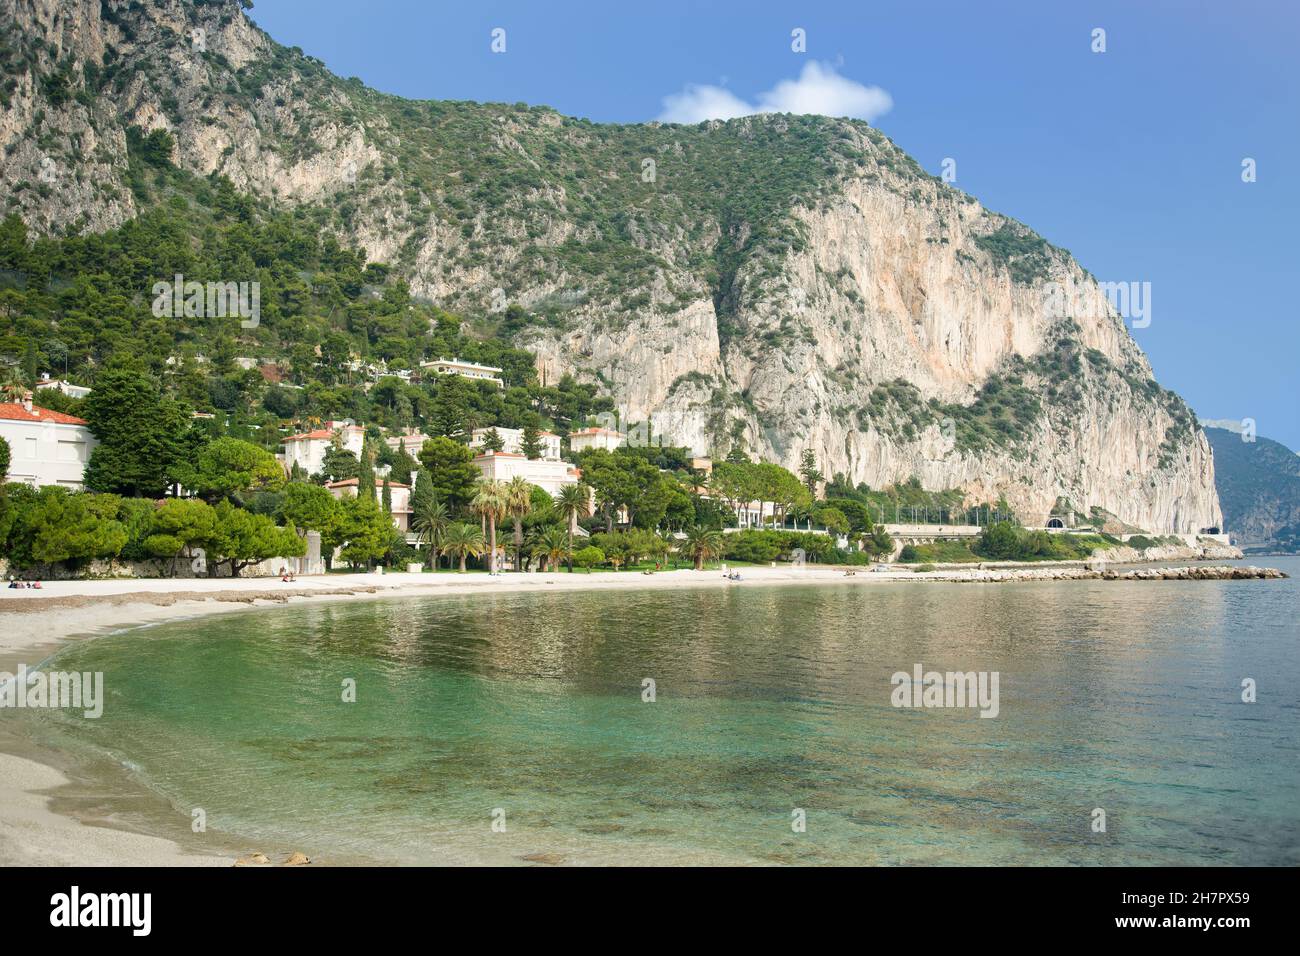 'Petite Afrique' beach in Beaulieu sur mer on the French Riviera with luxury residences and limestone cliffs in the background. Stock Photo